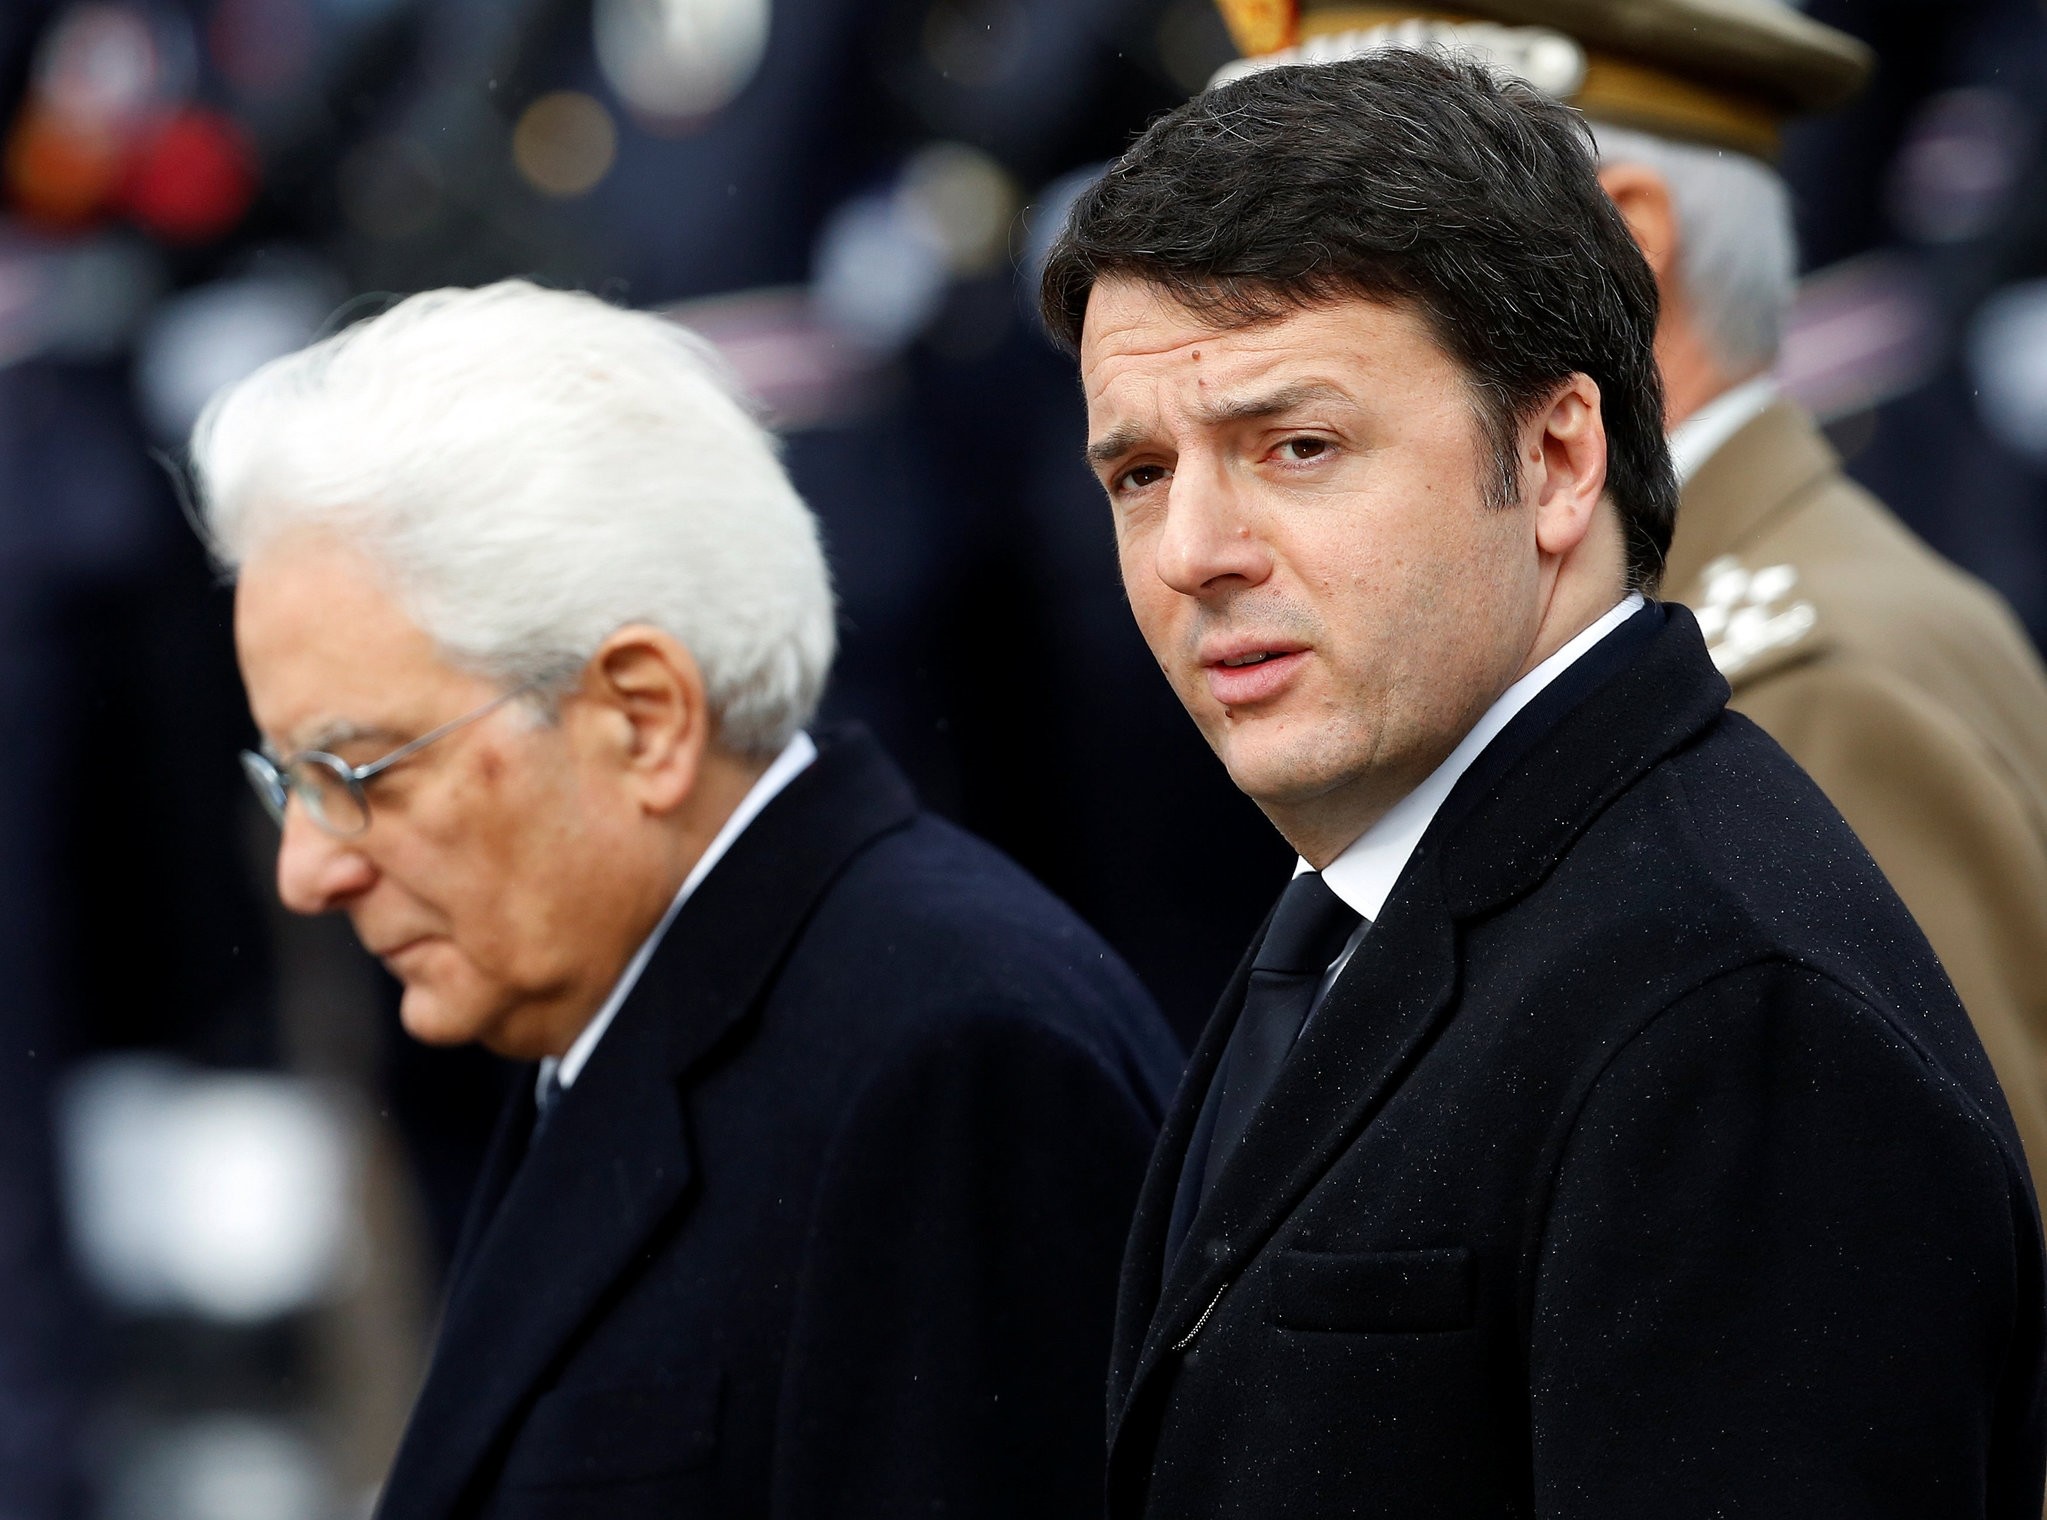  Italian Prime Minister Matteo Renzi (R) and Italy's newly elected president Sergio Mattarella as they arrive at the Unknown Soldier's monument in central Rome, February 3, 2015. (Reuters Photo)